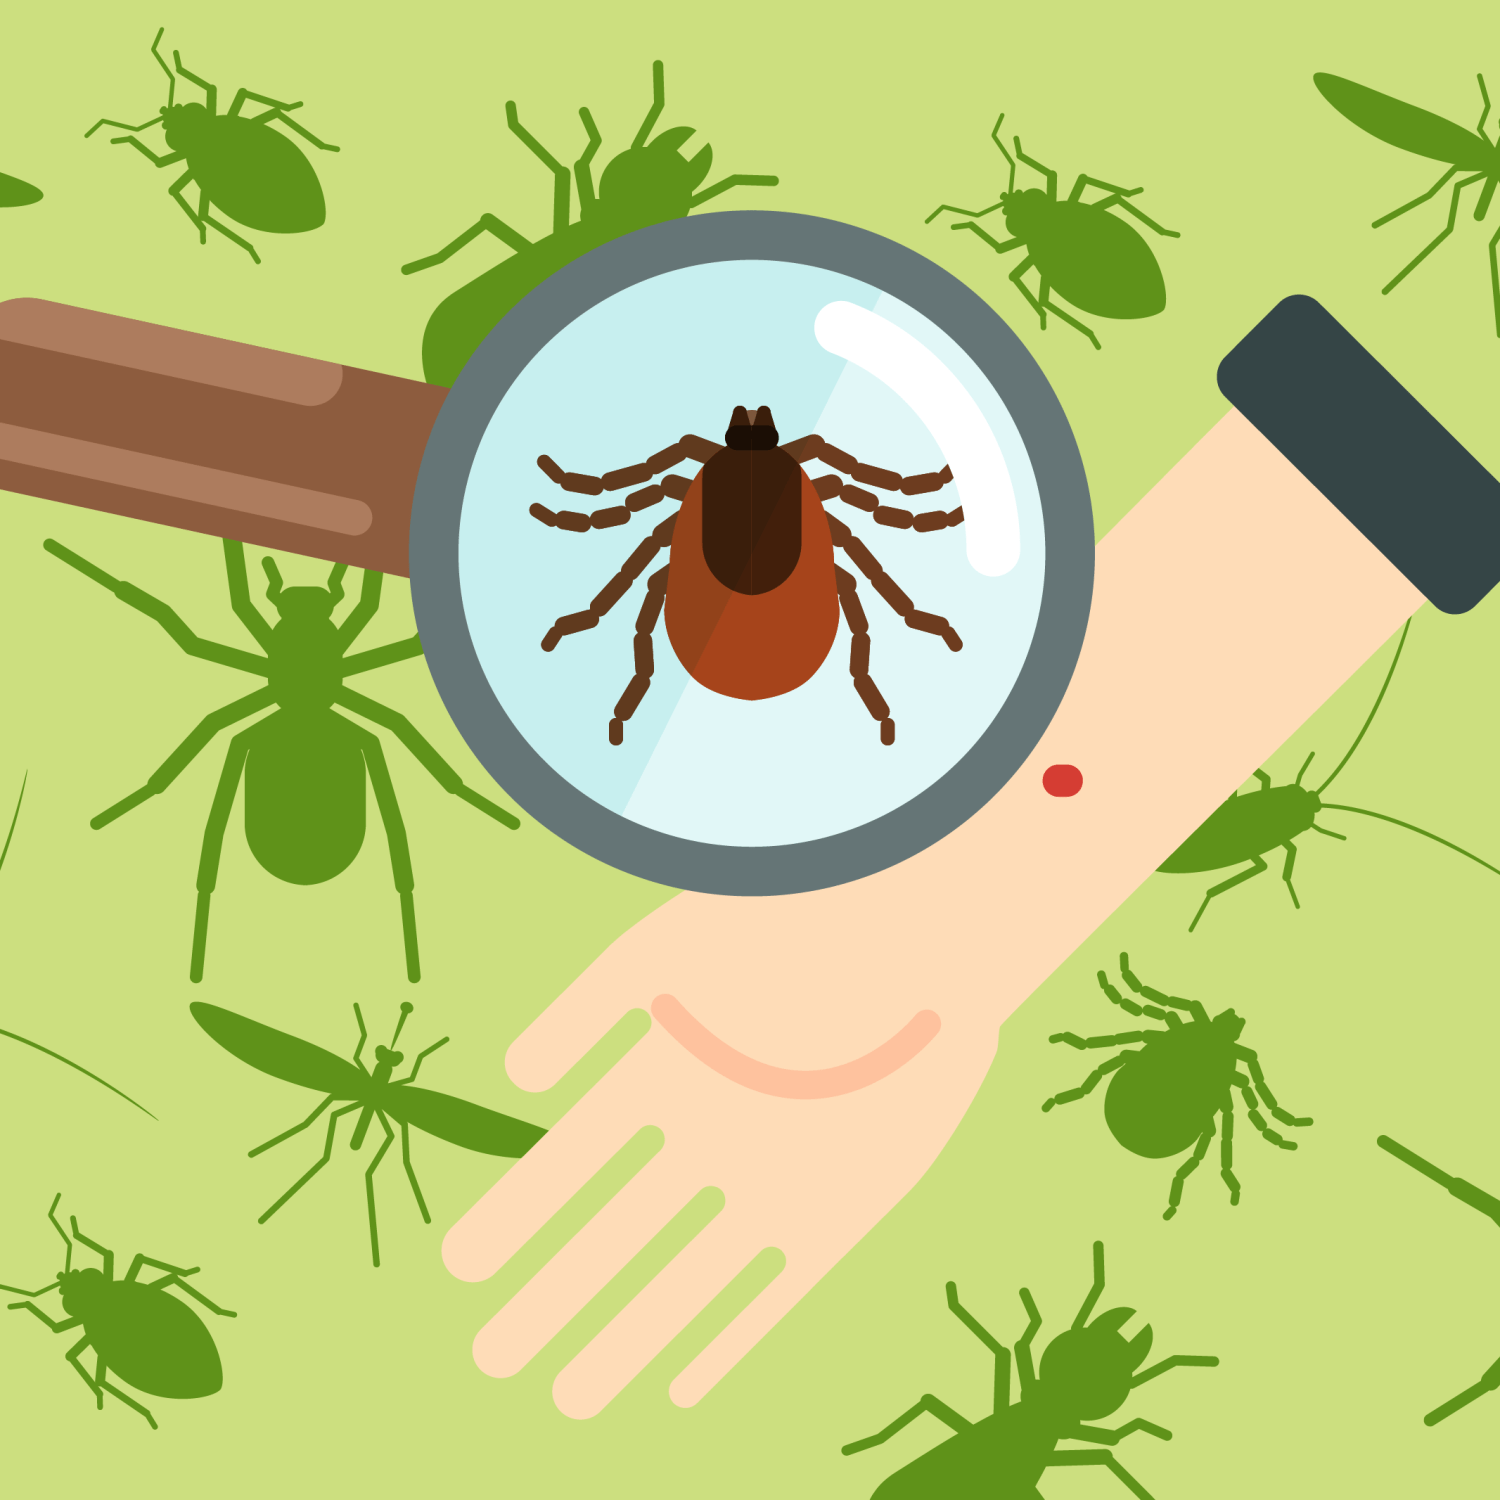 how-to-get-rid-of-ticks-home-yard-pet-safety-illustration-tick-magnifying-glass